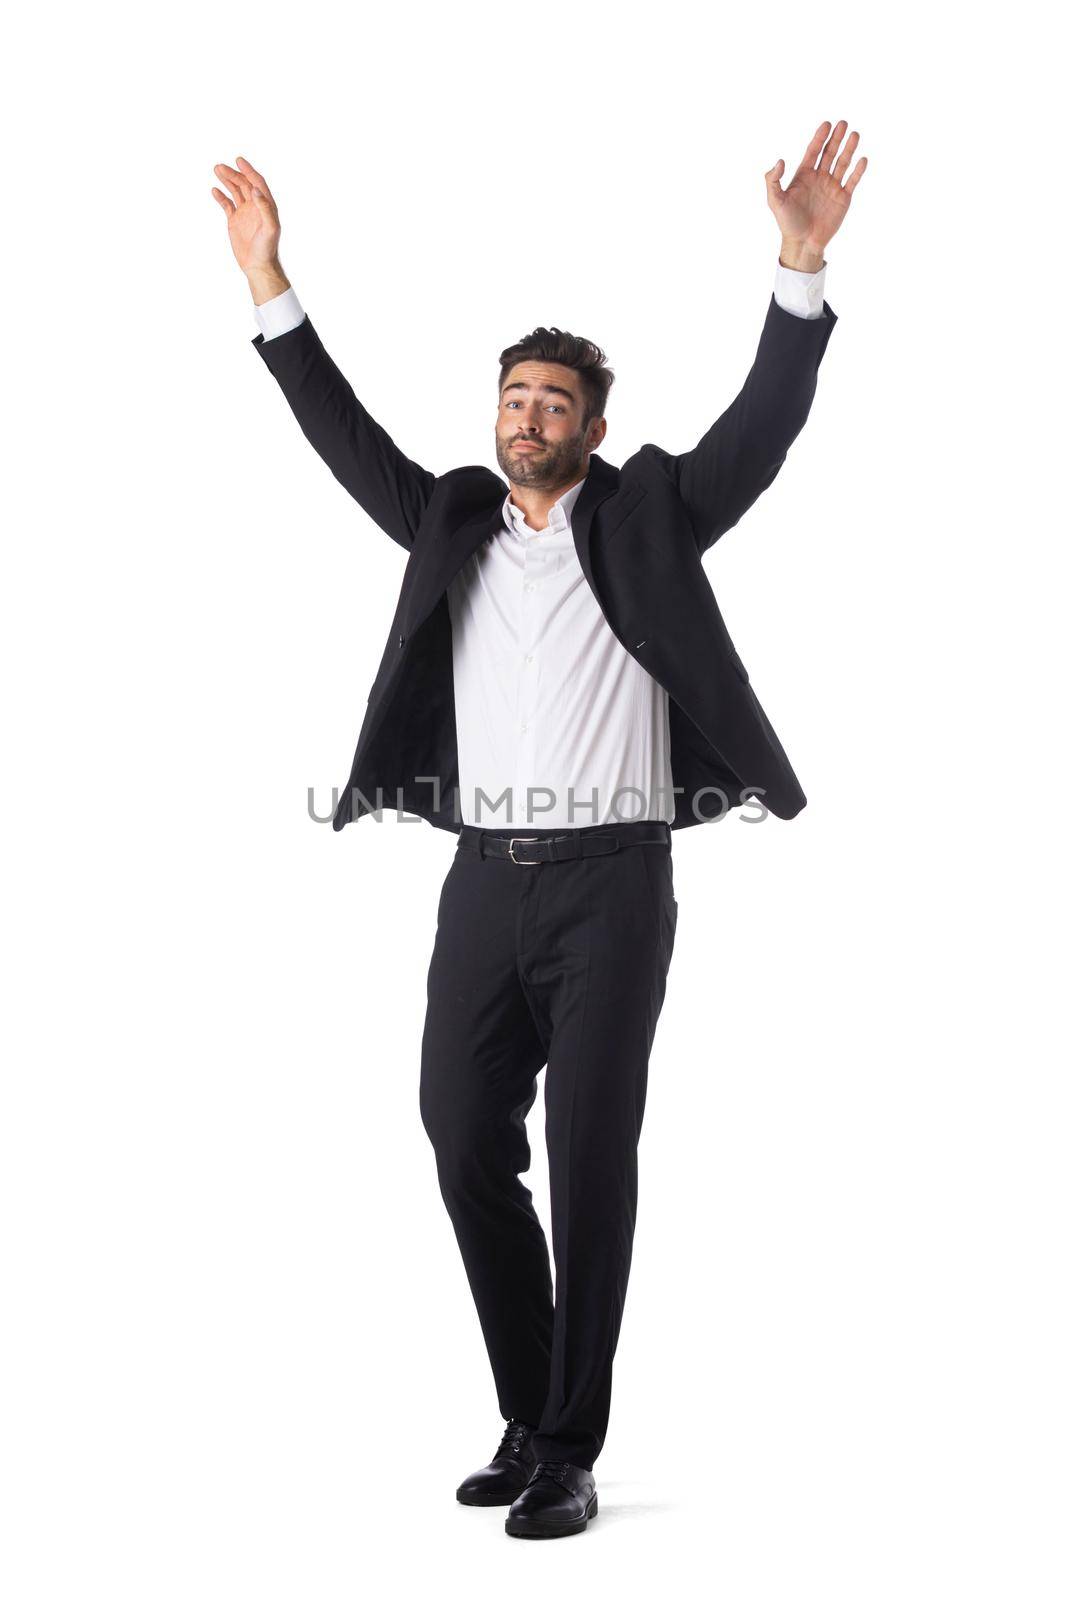 Handsome young businessman celebrating victory smiling happily with arms raised successful celebration winner emotion excitement achievement professional growth